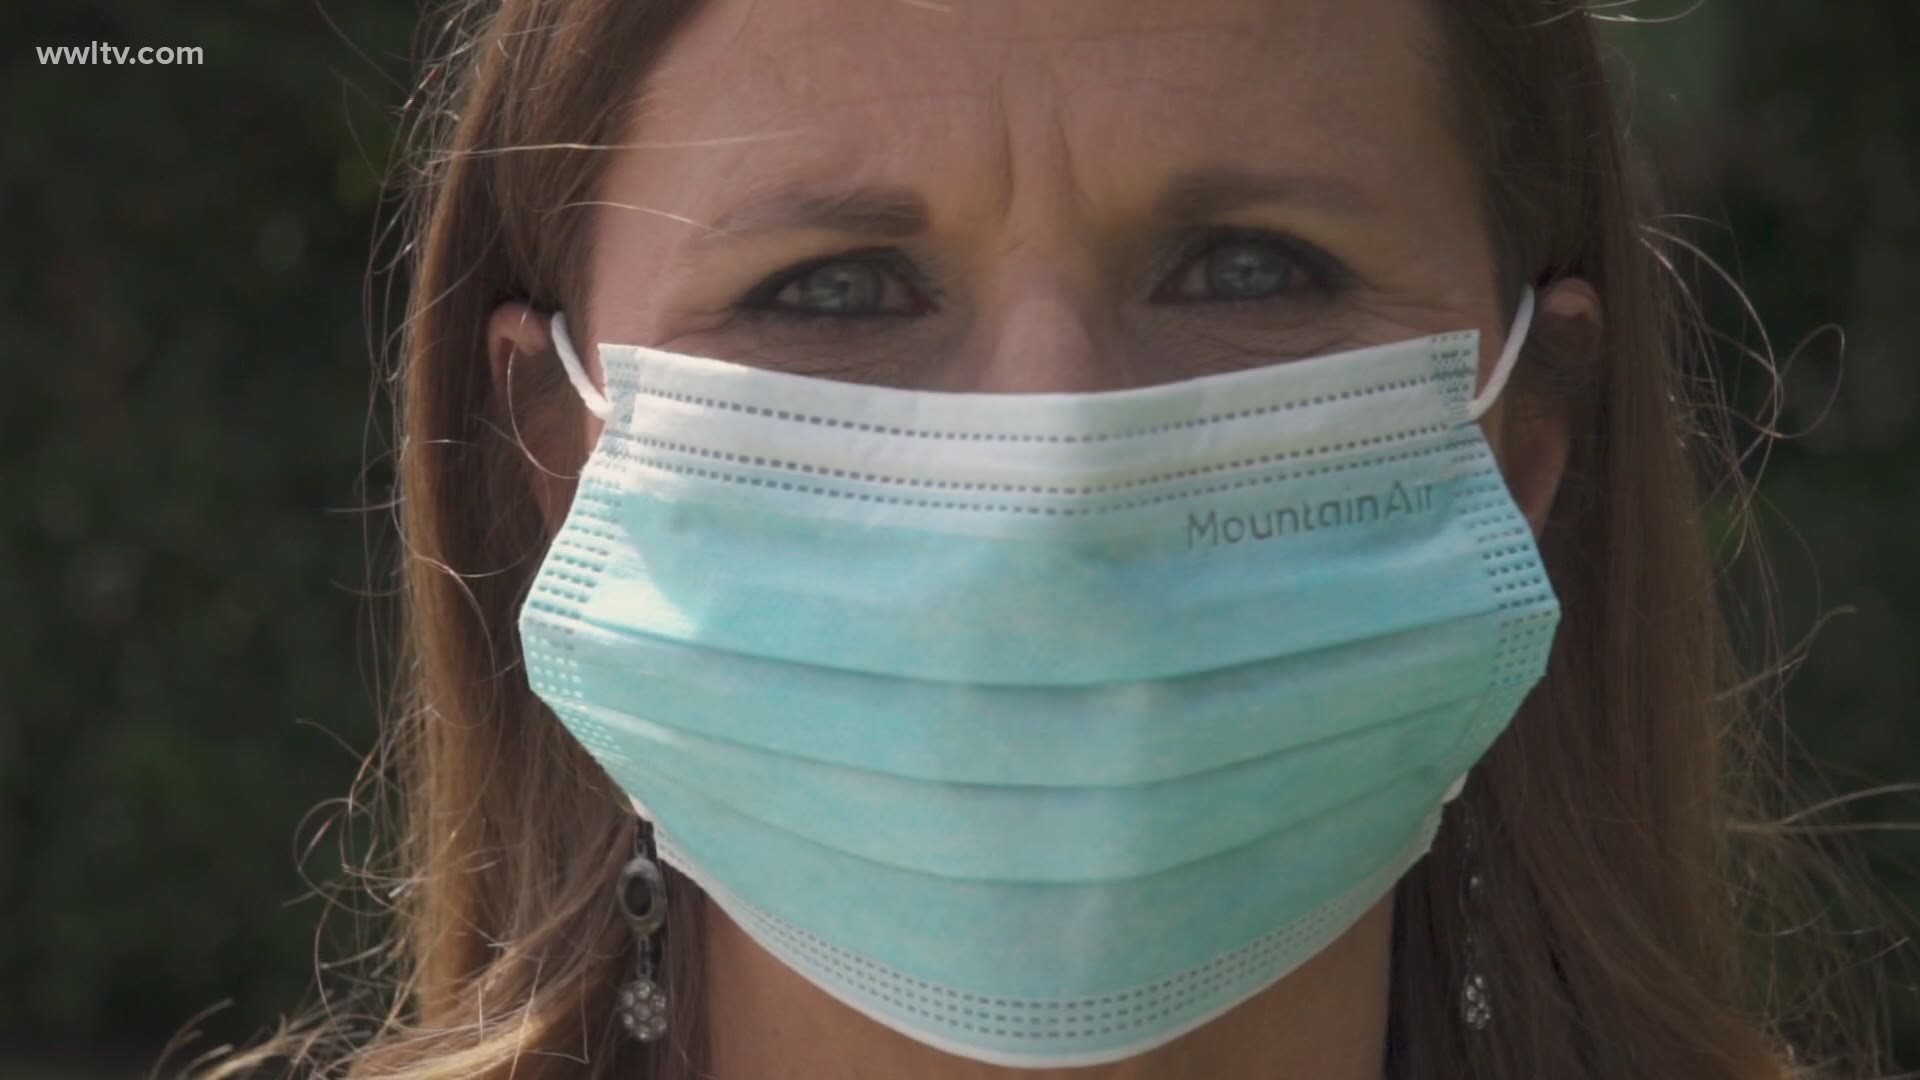 According to a recent study commissioned by the World Health Organization, a mask may also lower the risk of infection for the person wearing it.